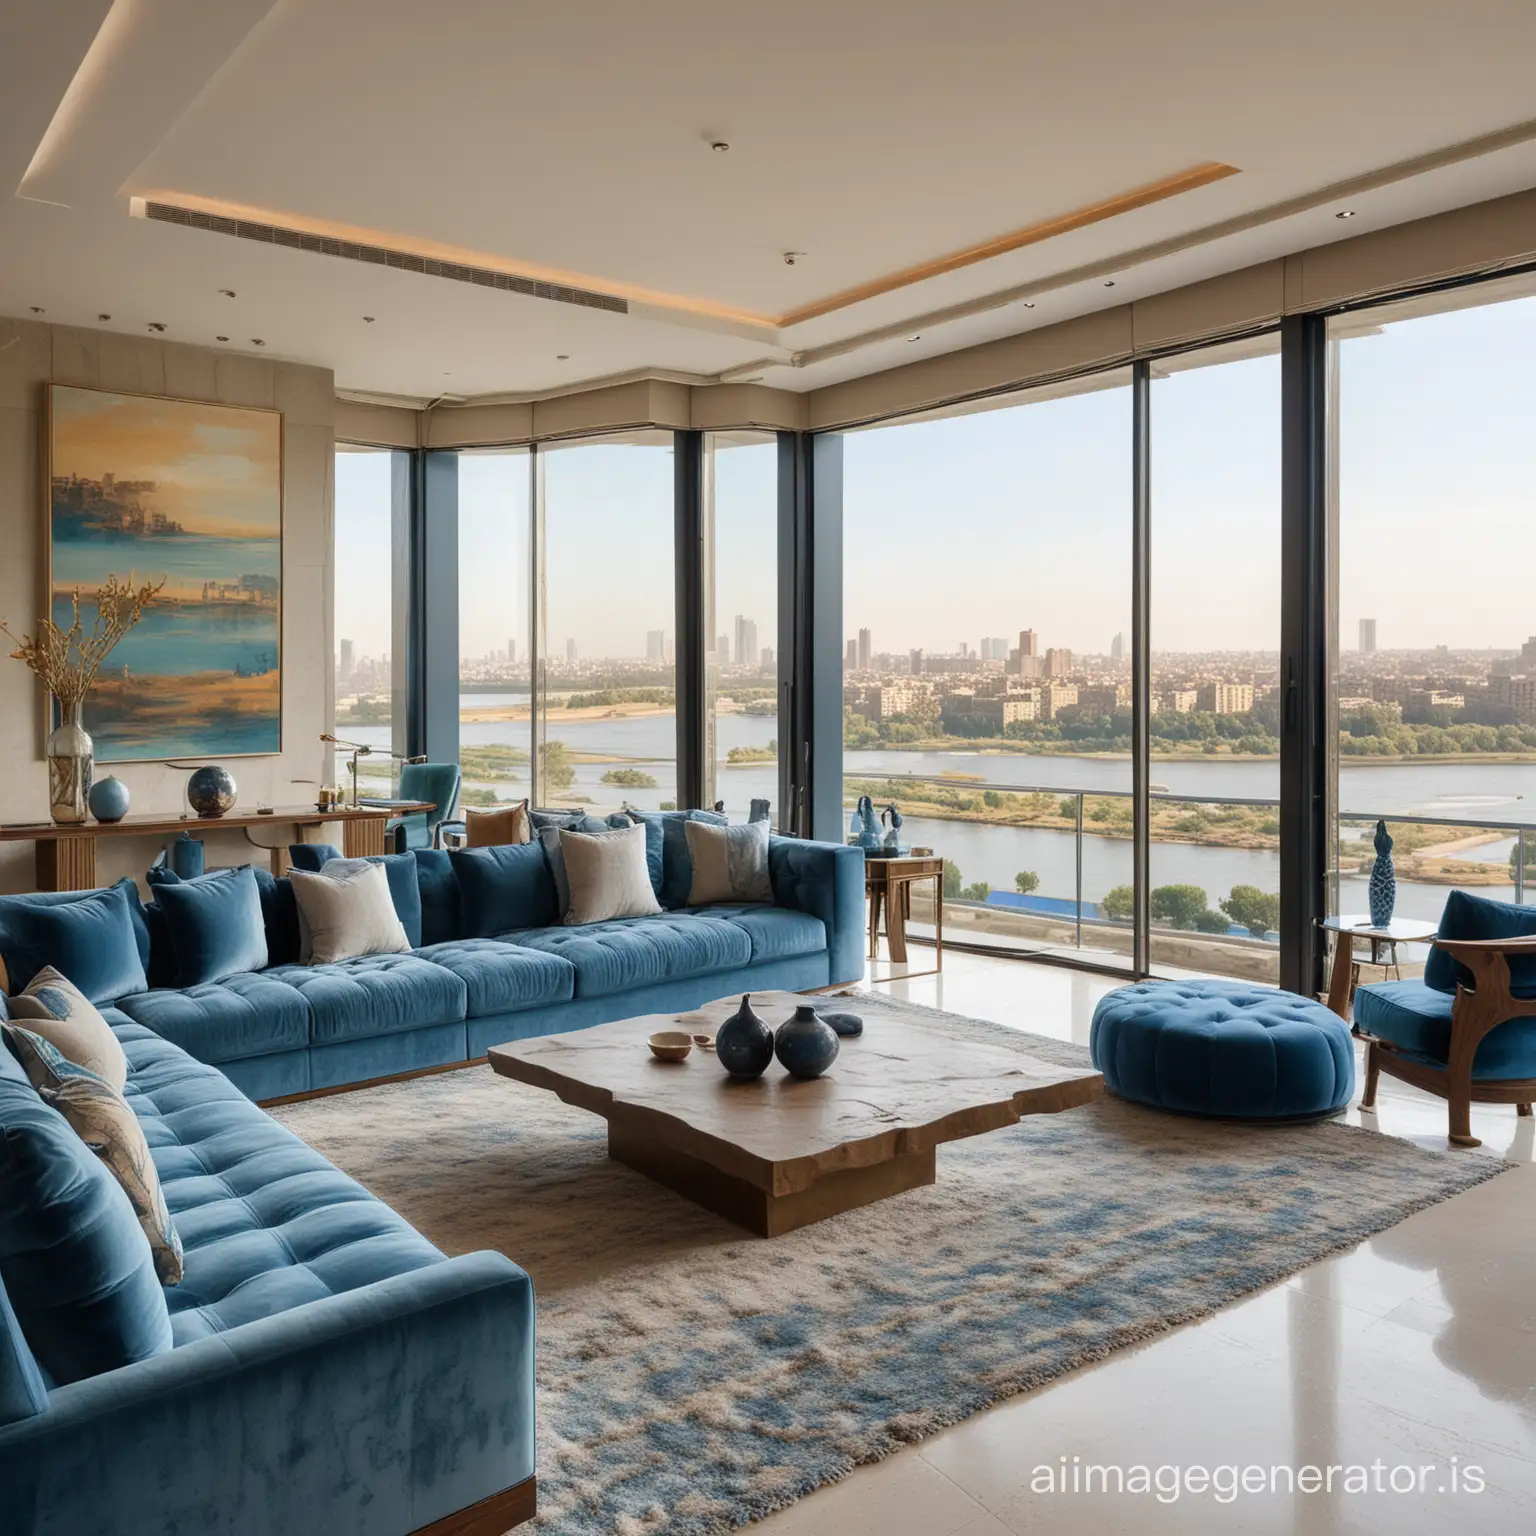 A lavish apartment interior design with a Nile River panorama, featuring contemporary furniture, a blend of earthy and blue hues inspired by the river, floor-to-ceiling windows allowing natural light to illuminate the space, and a serene, airy ambiance, Sculpture, using clay and mixed media